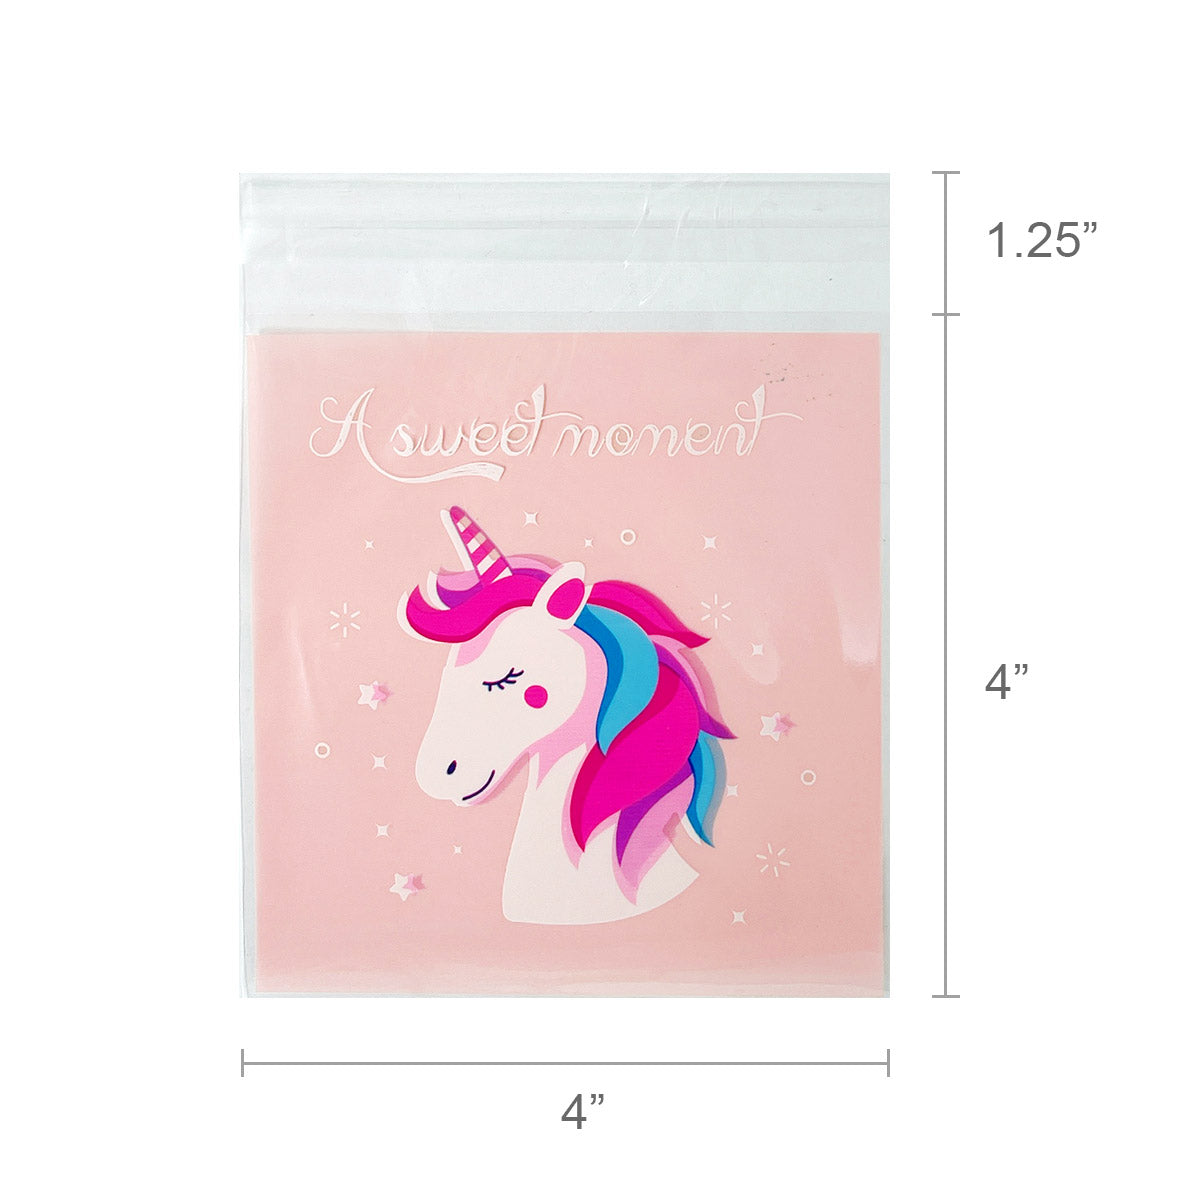 Wrapables Transparent Self-Adhesive 4" x 4" Candy and Cookie Bags, Favor Treat Bags for Parties and Wedding (200pcs)